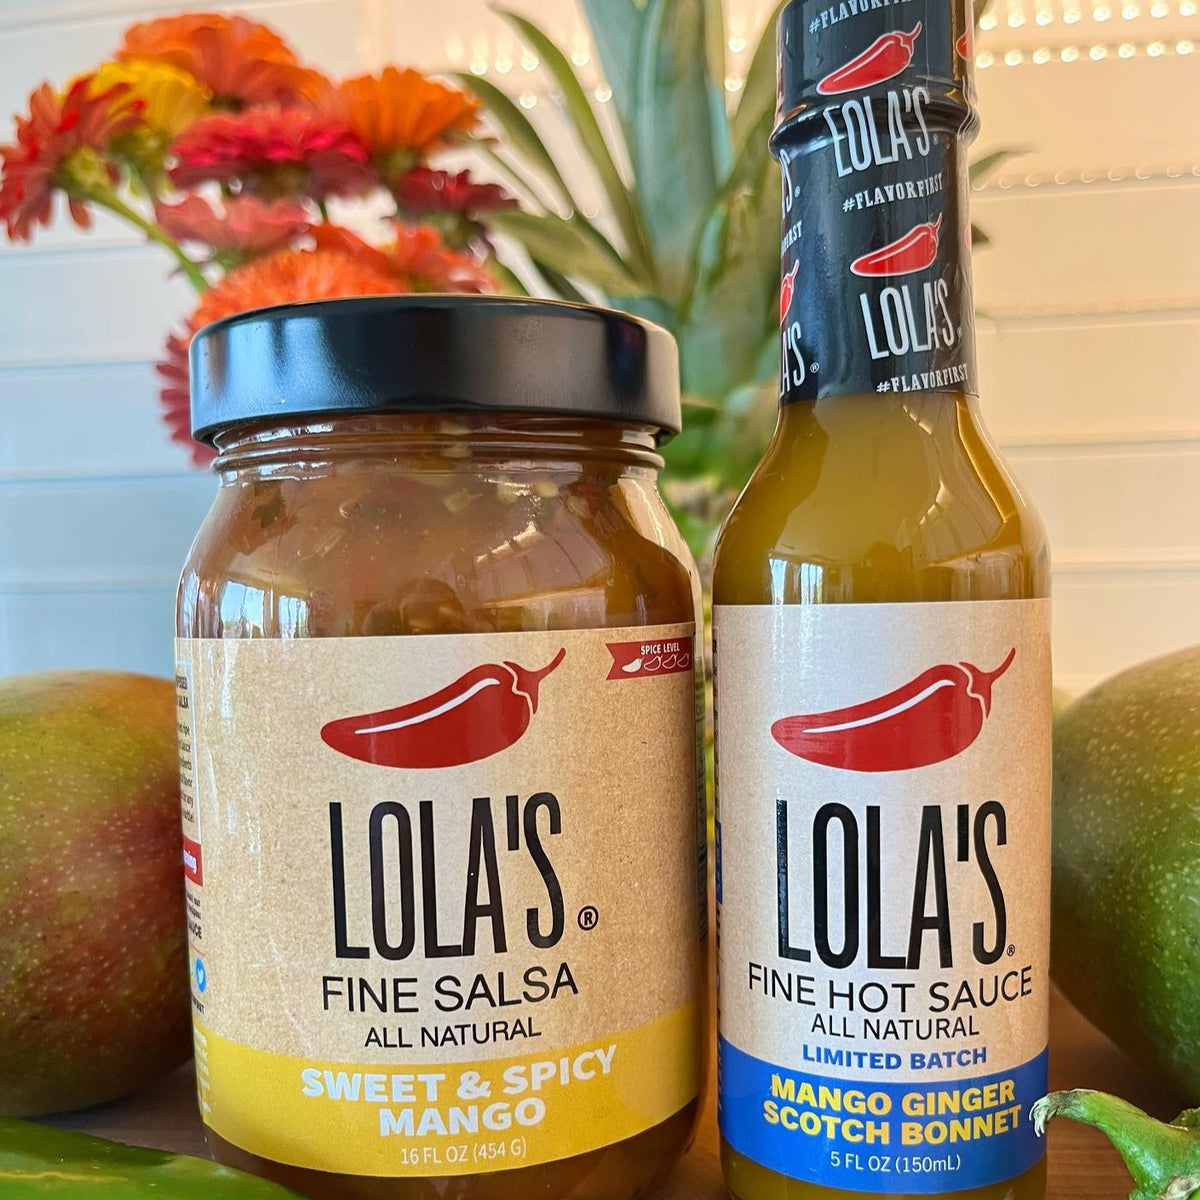 Lola's Mango Ginger Scotch Bonnet Hot Sauce, a couple of jars of hot sauce and a jar of salsa on a table, a bottle of hot sauce, a close up of a green vegetable and a green pepper on a wooden surface.